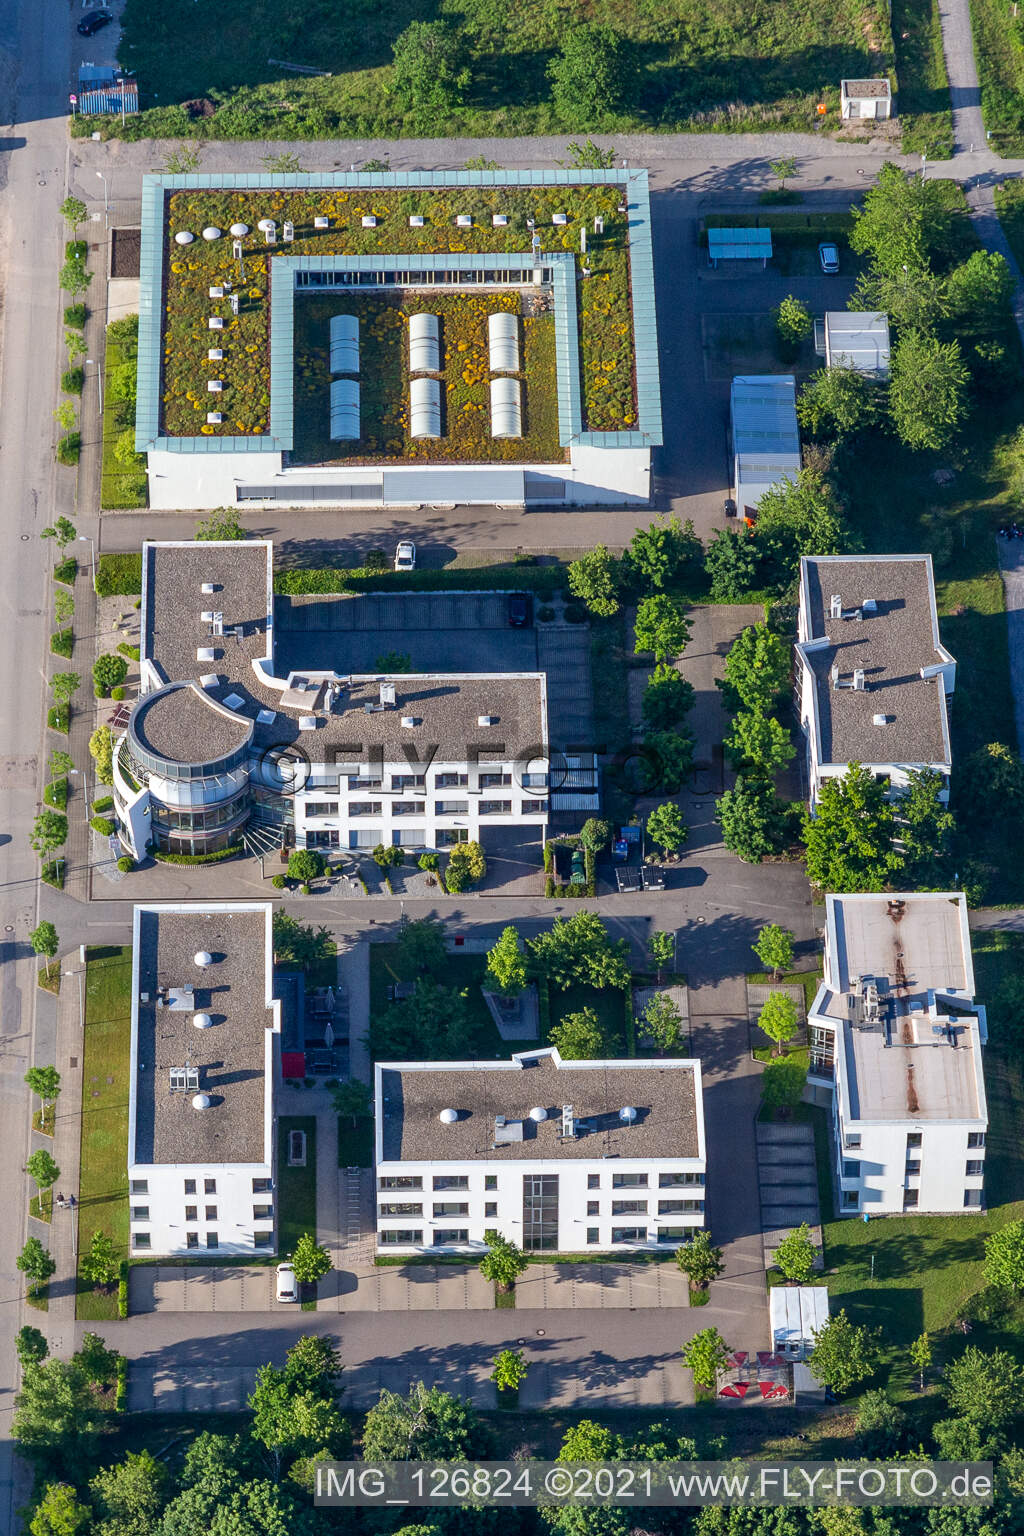 CAS Software Technology Park on CAS Weg in the district Rintheim in Karlsruhe in the state Baden-Wuerttemberg, Germany